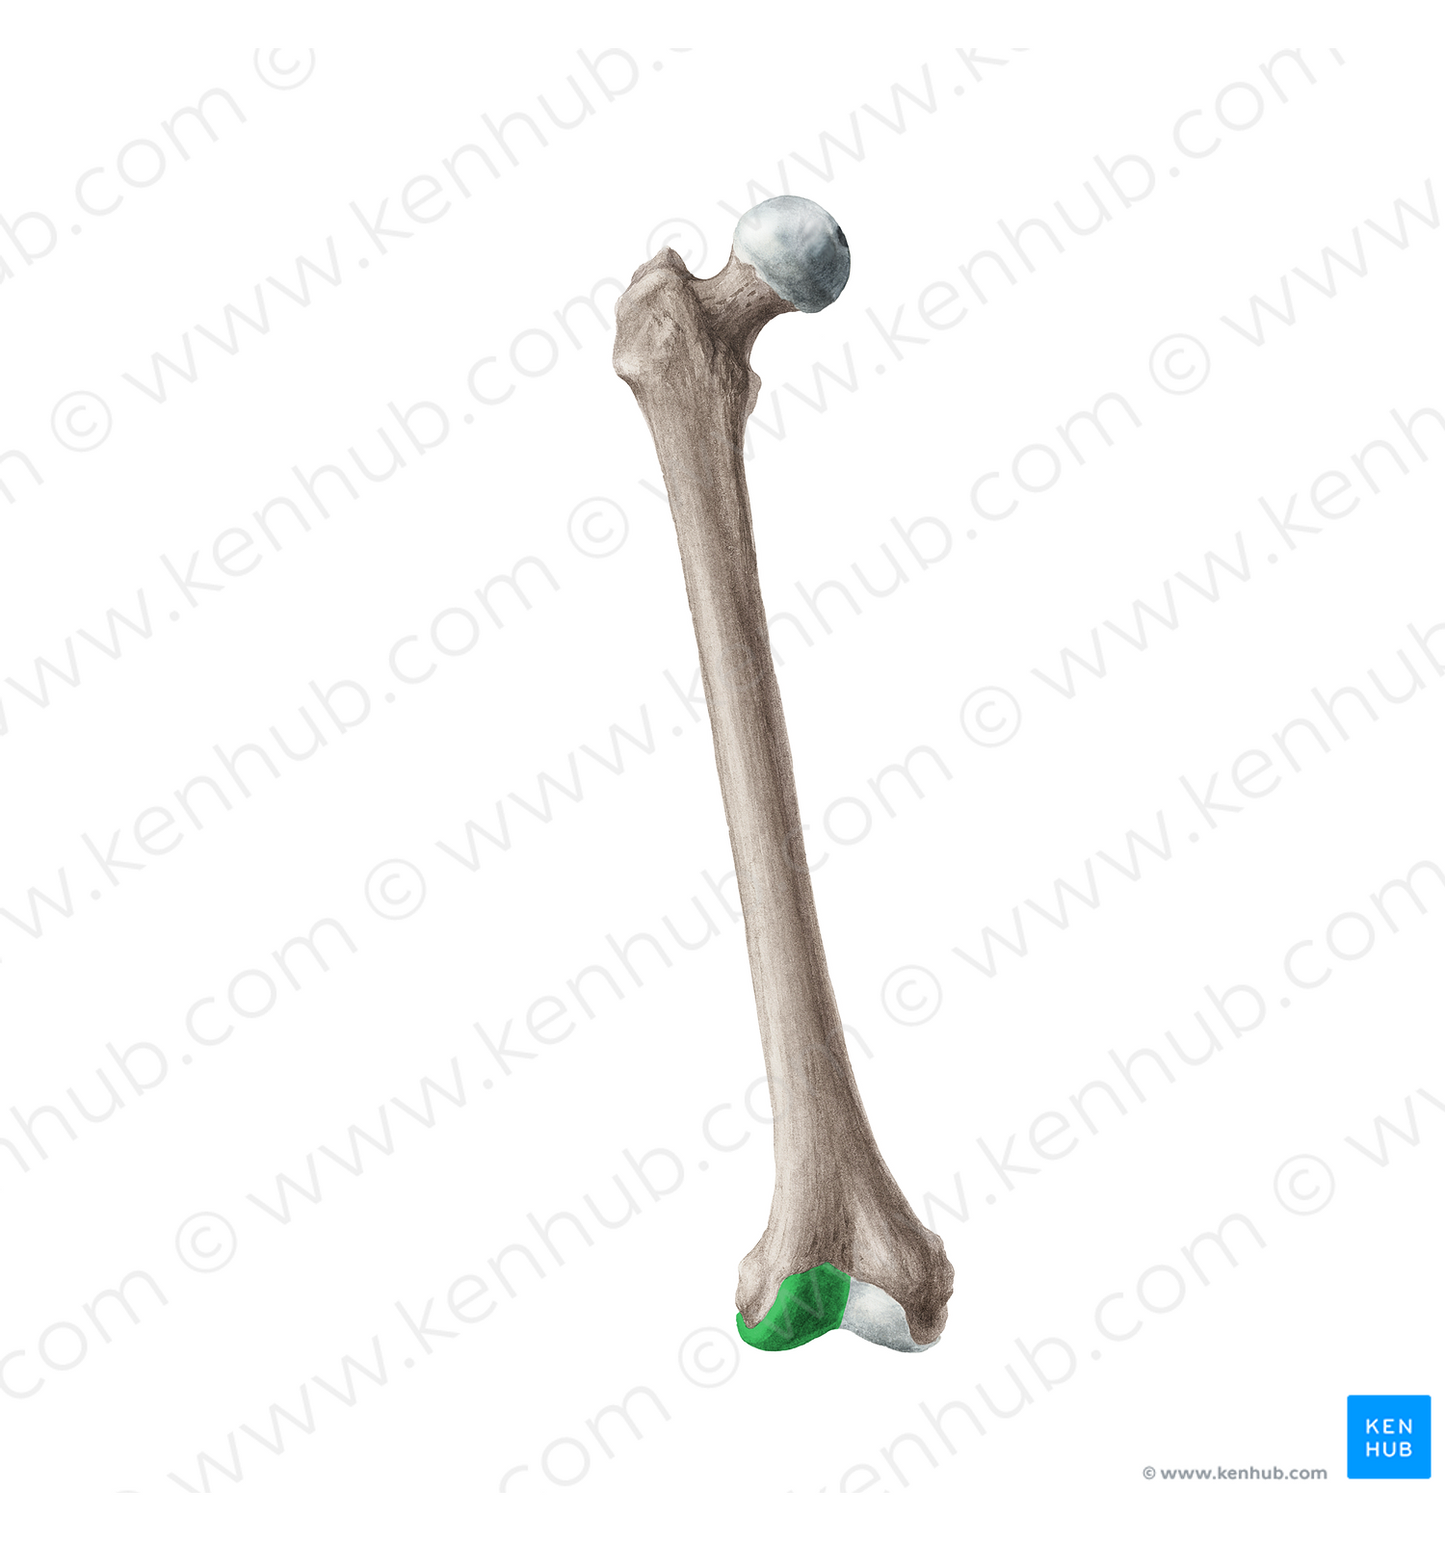 Lateral condyle of femur (#19956)